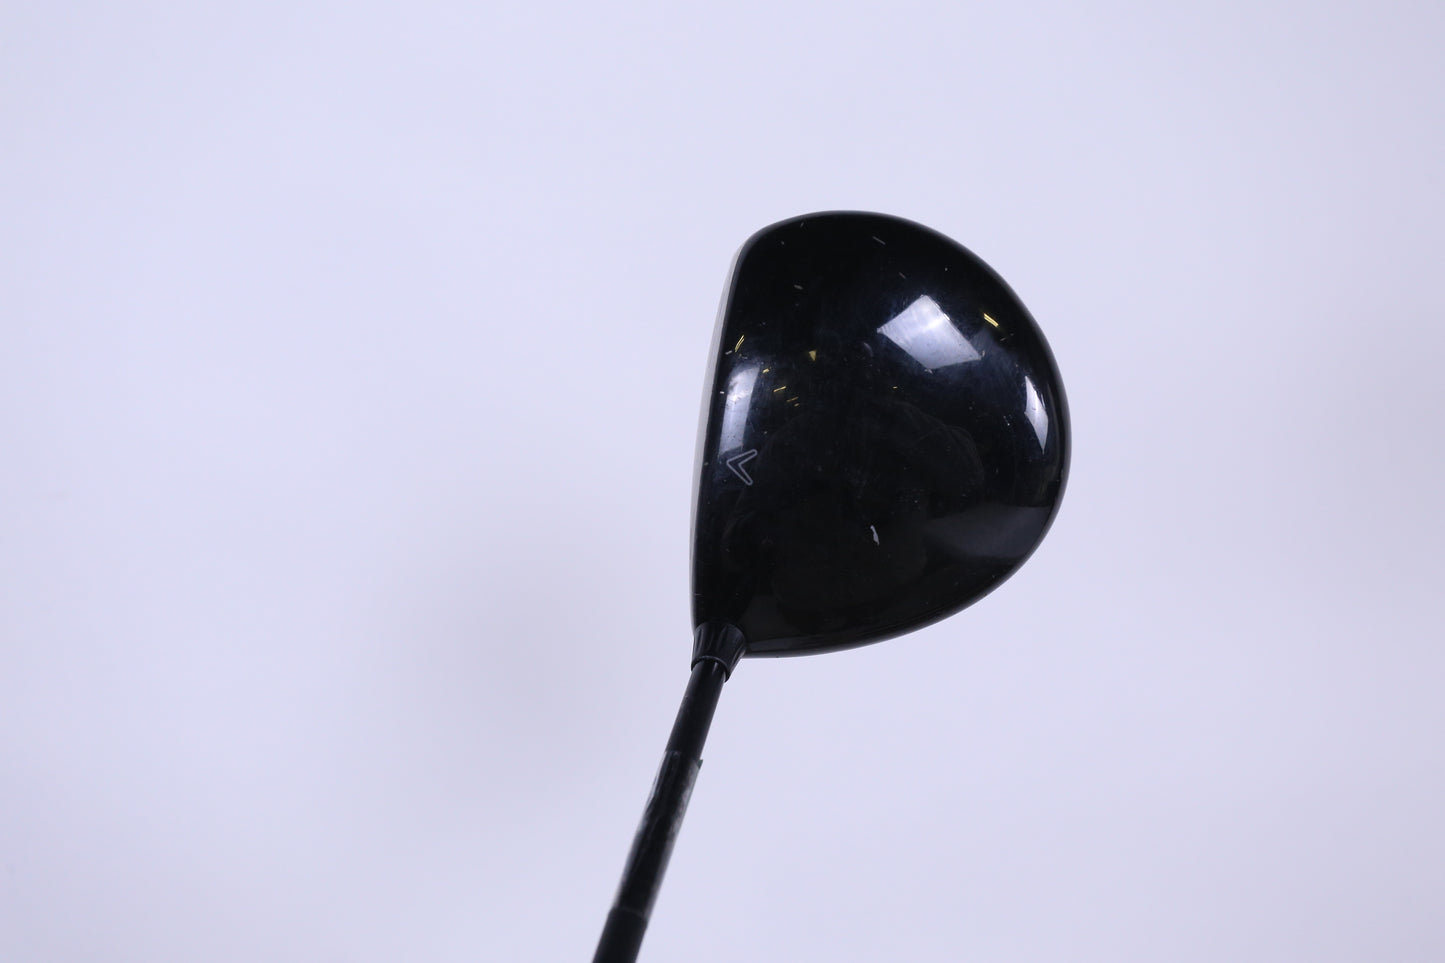 Callaway X460 Driver - Right-Handed - 11 Degrees - Ladies Flex